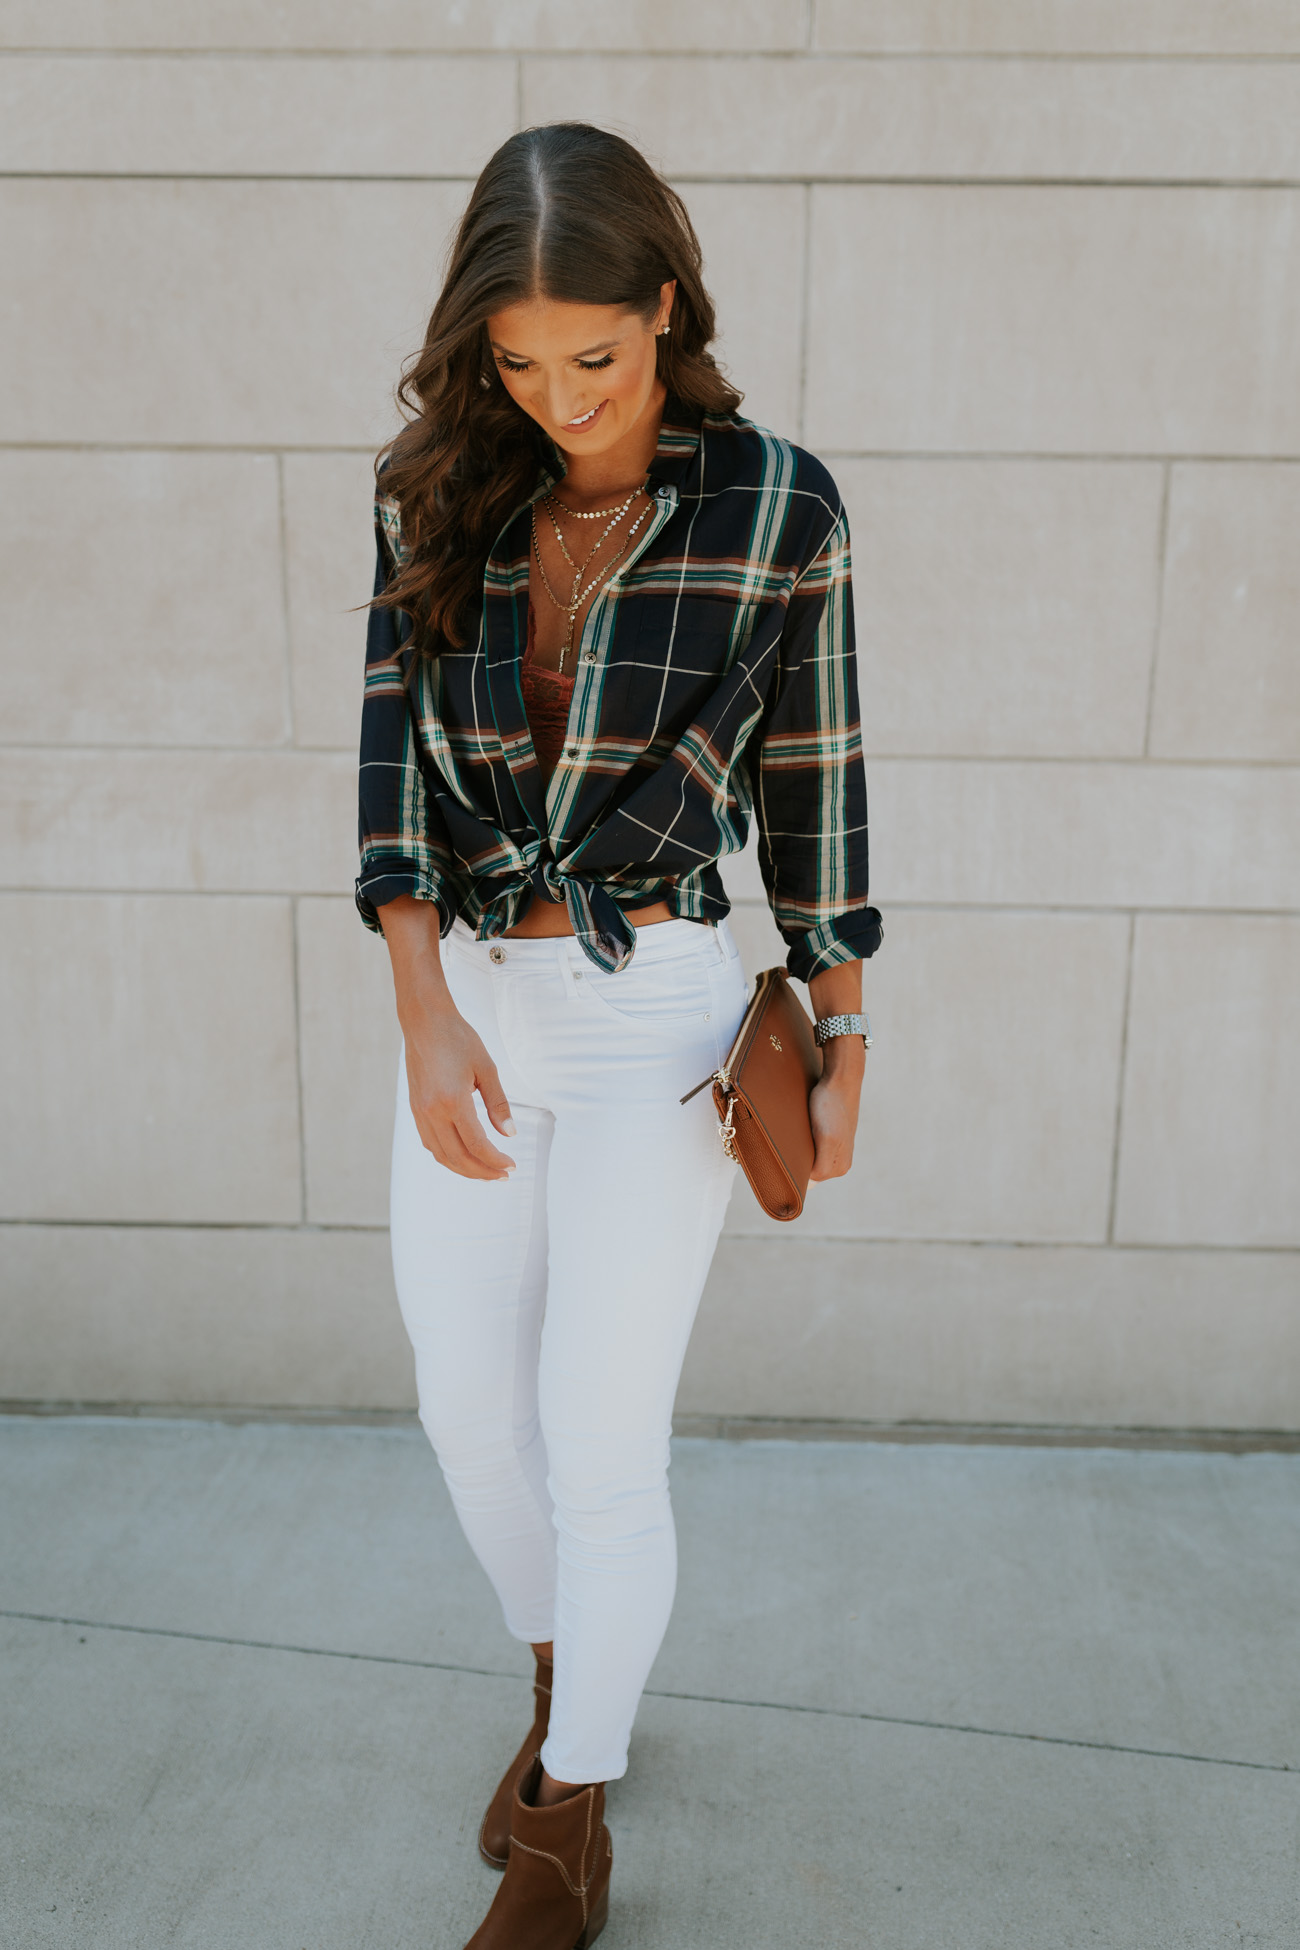 summer plaid shirt, white skinny jean, fall style, fall fashion, ugg booties, summer style, transitional style, tory burch crossbody bag, front tie shirt, tie plaid shirt, layered necklace, delicate necklace // grace wainwright, grace white a southern drawl